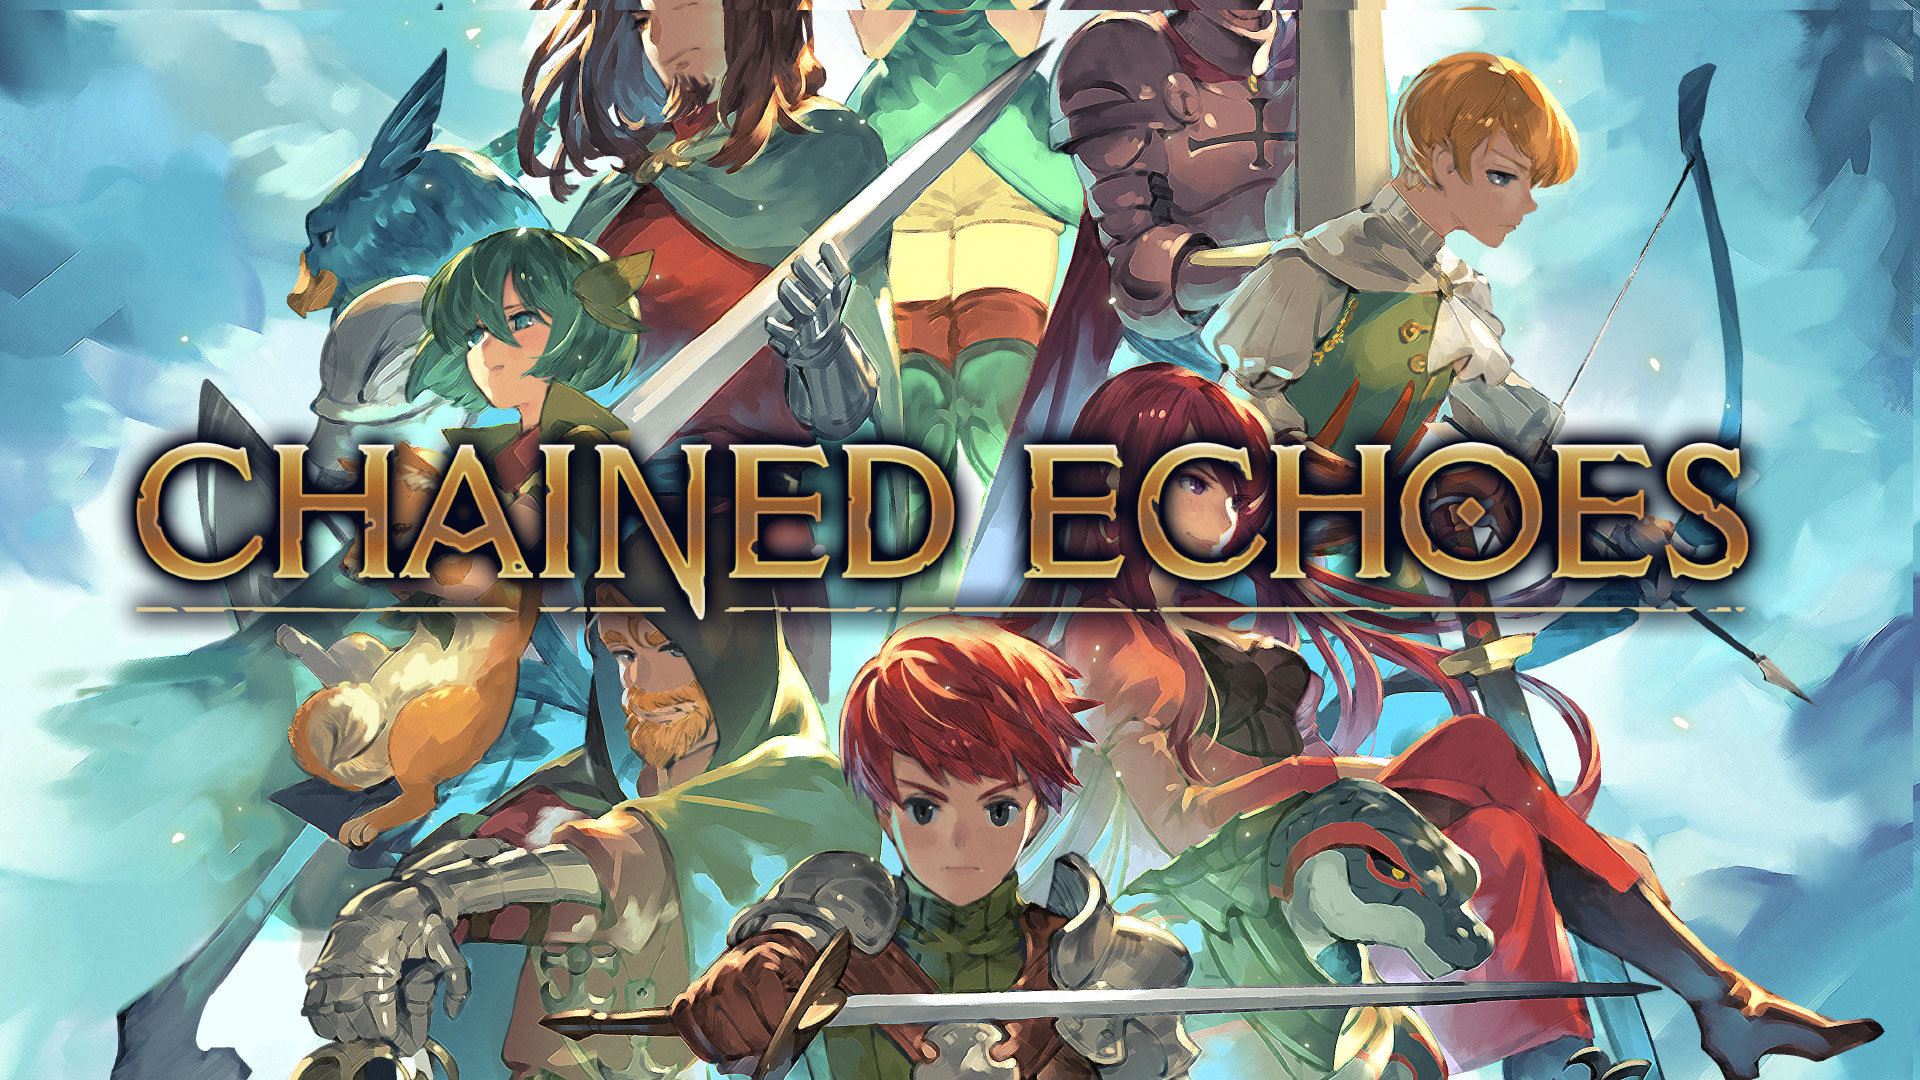 Chained Echoes Receives New Game Plus in Patch 1.2, Consoles to